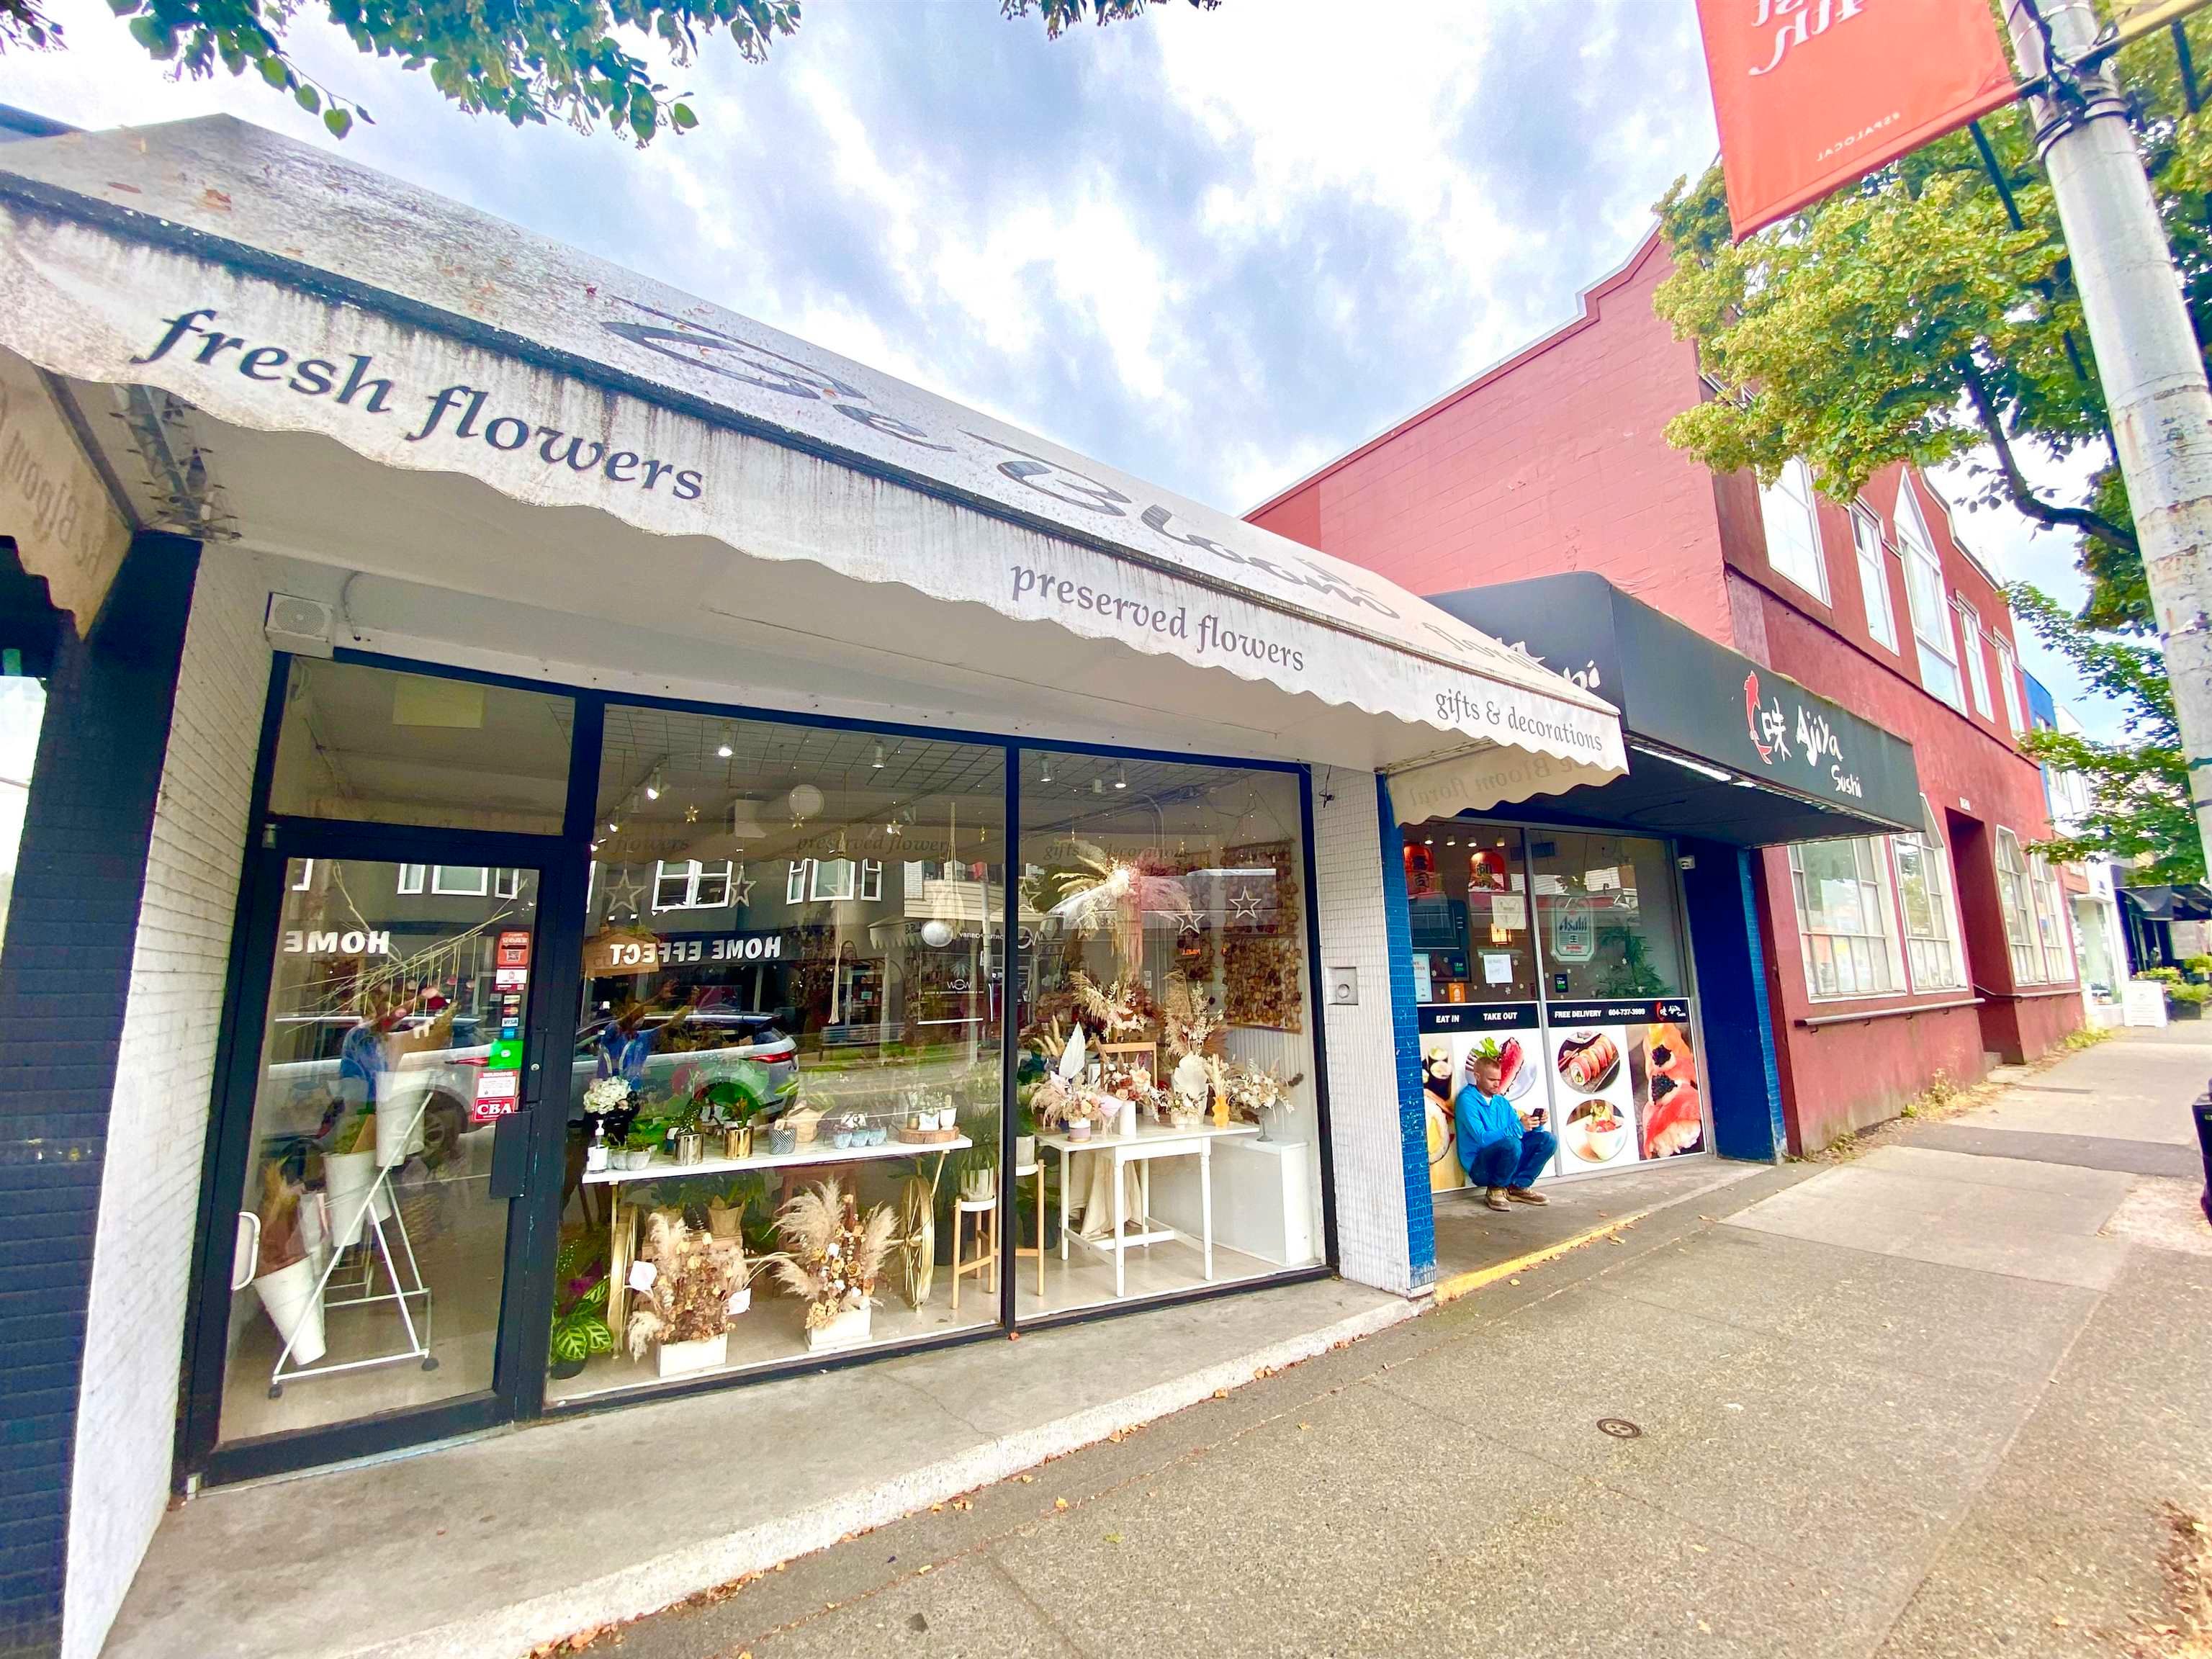 Main Photo: 1820 W 4TH Avenue in Vancouver: Kitsilano Business for sale (Vancouver West)  : MLS®# C8047777